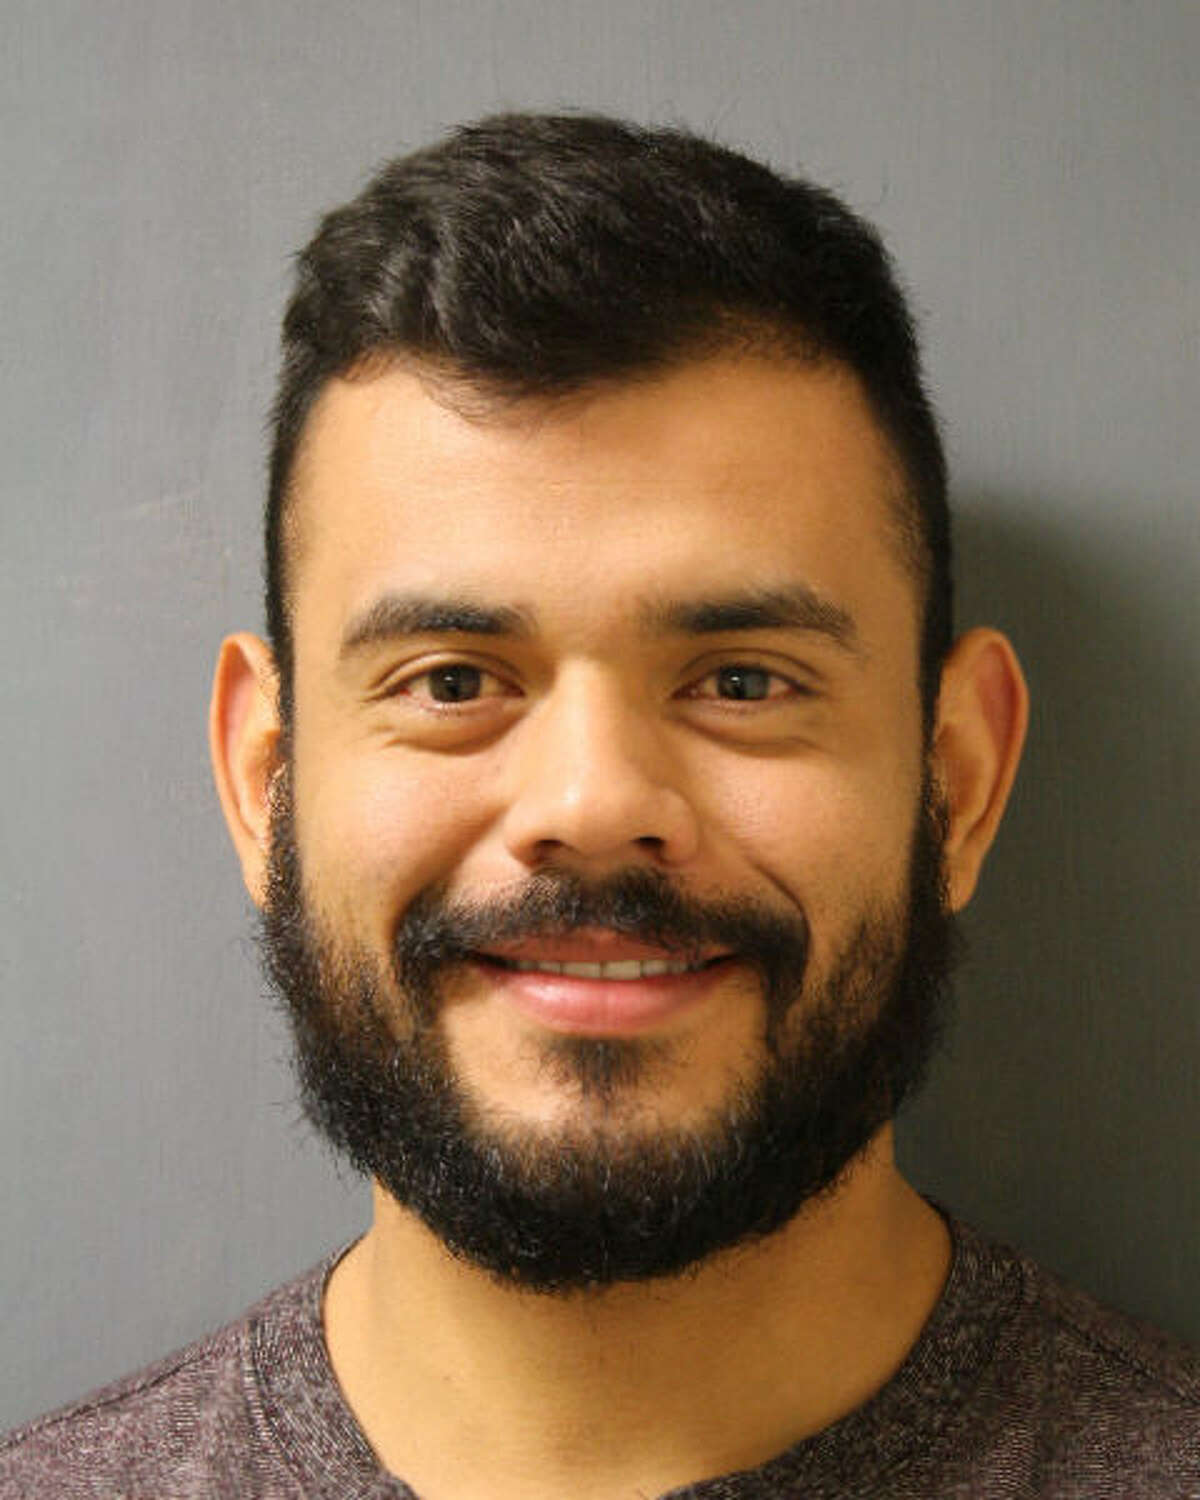 FILE - Vidal Valladares smiles in a mugshot taken during his arrest back in December 2015. Widespread video showed Vallardes and others stopping traffic on Interstate 45 so that he could propose to his girlfriend in the middle of the road.